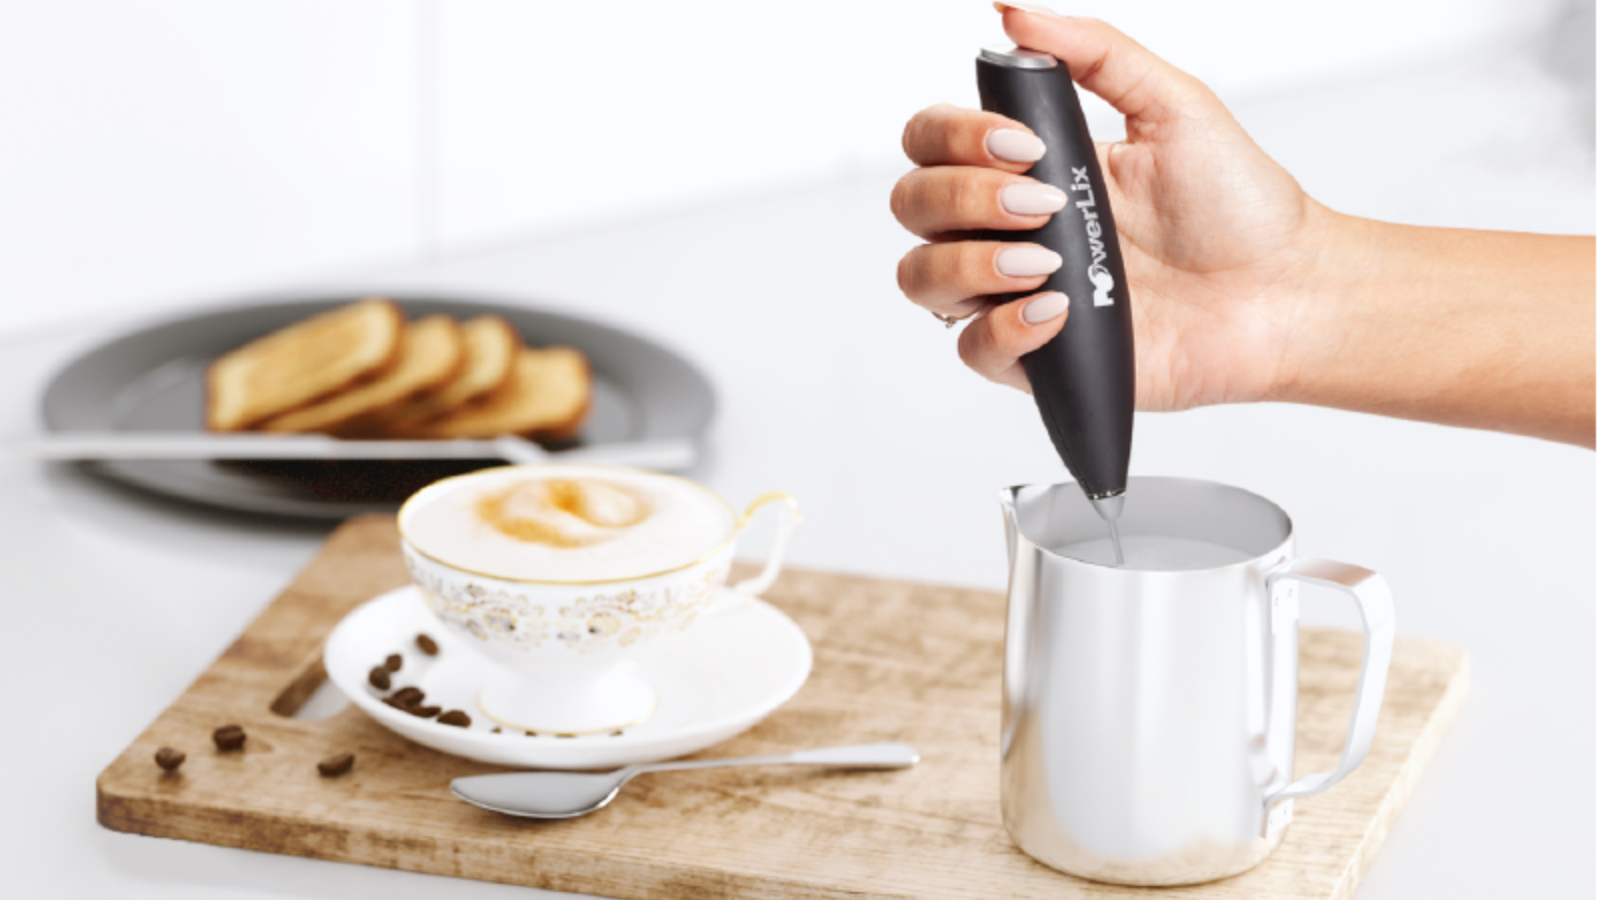 Whip it good: 25,000+ shoppers use this $6 milk frother for foamy drinks at home — get it for 65% off